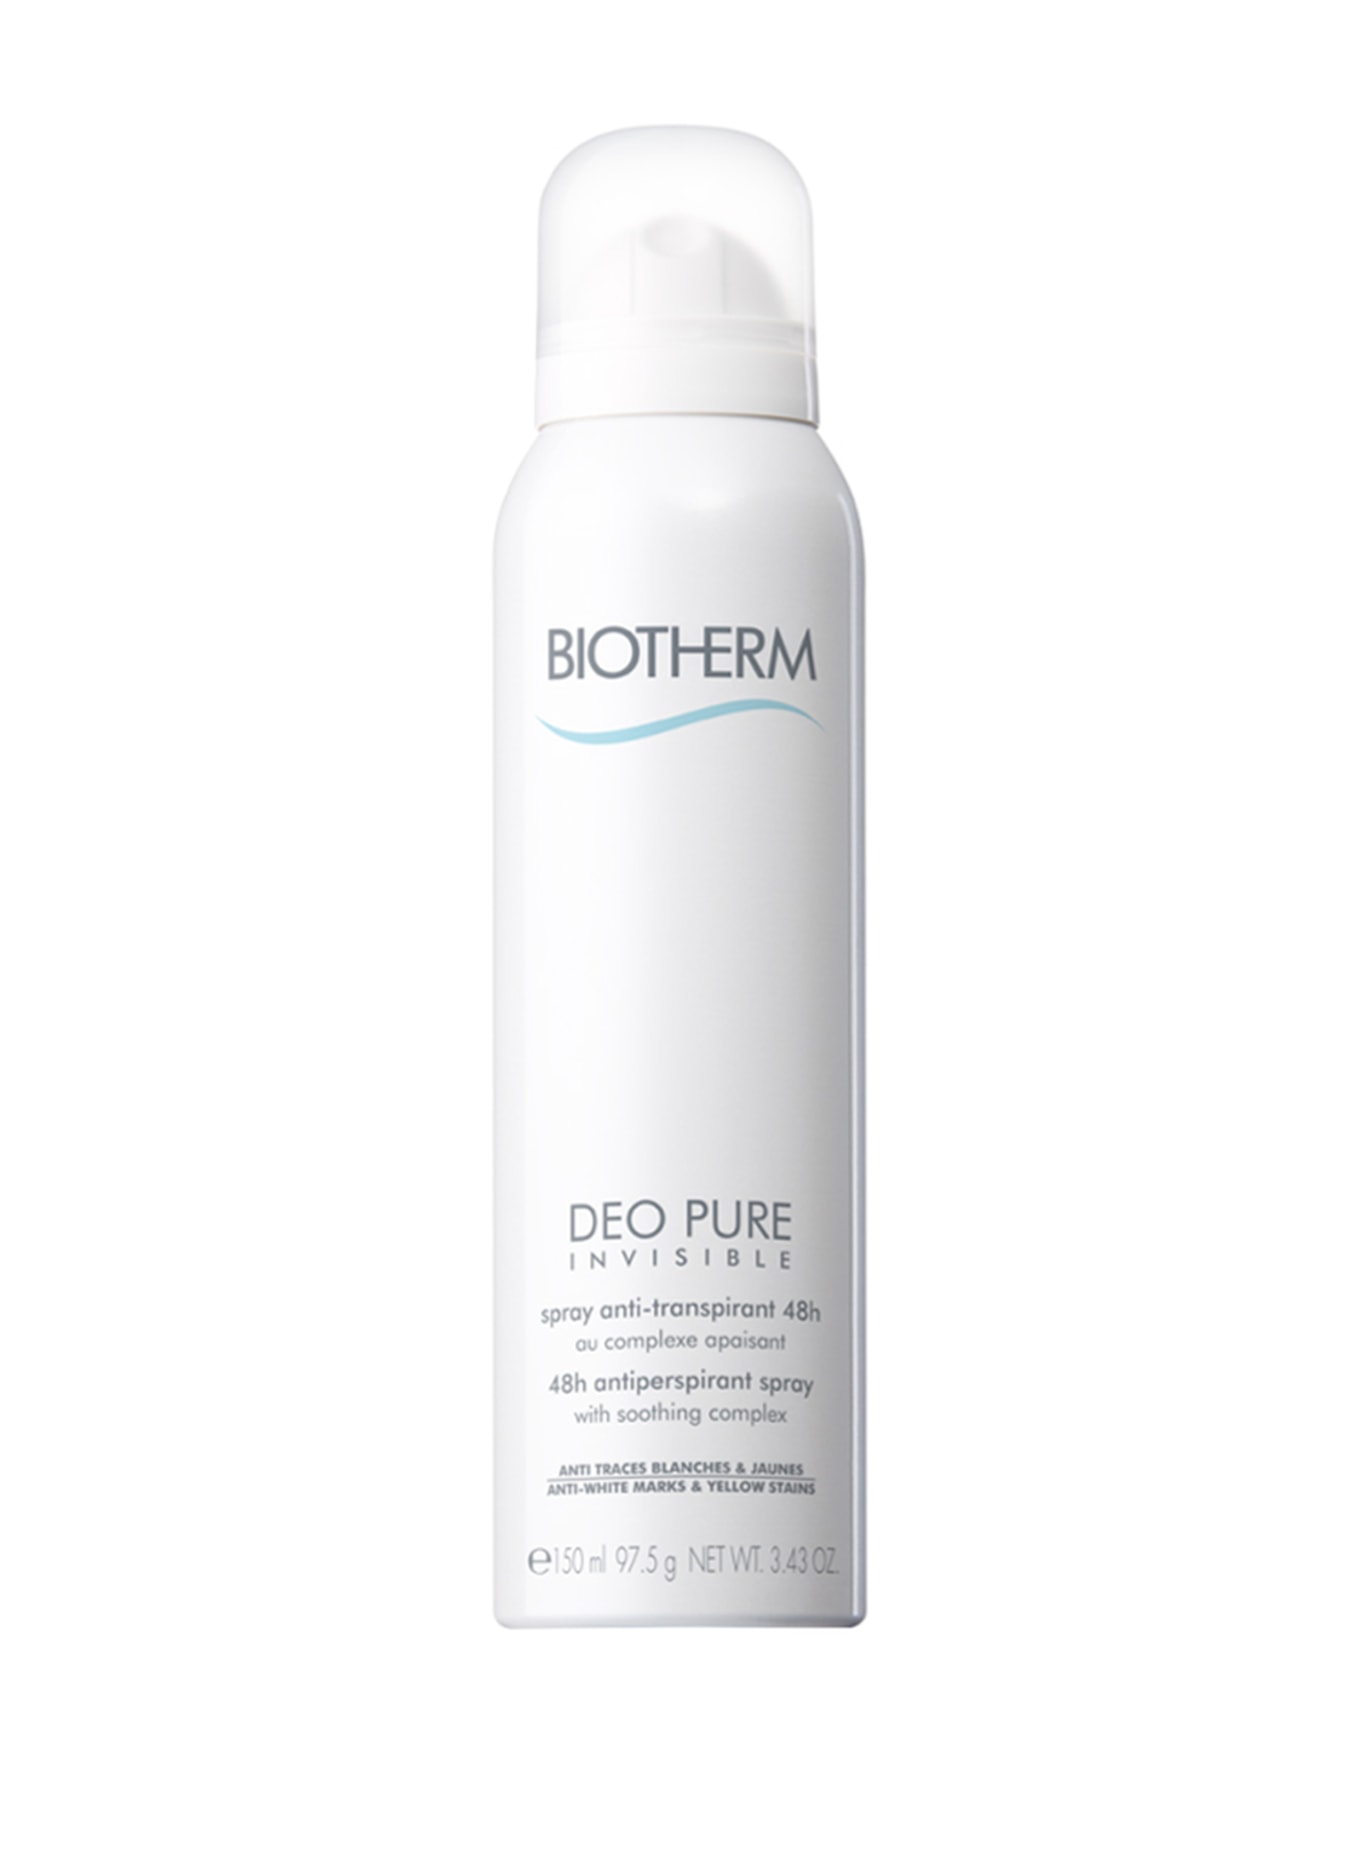 BIOTHERM DEO PURE INVISIBLE  (Obrázek 1)